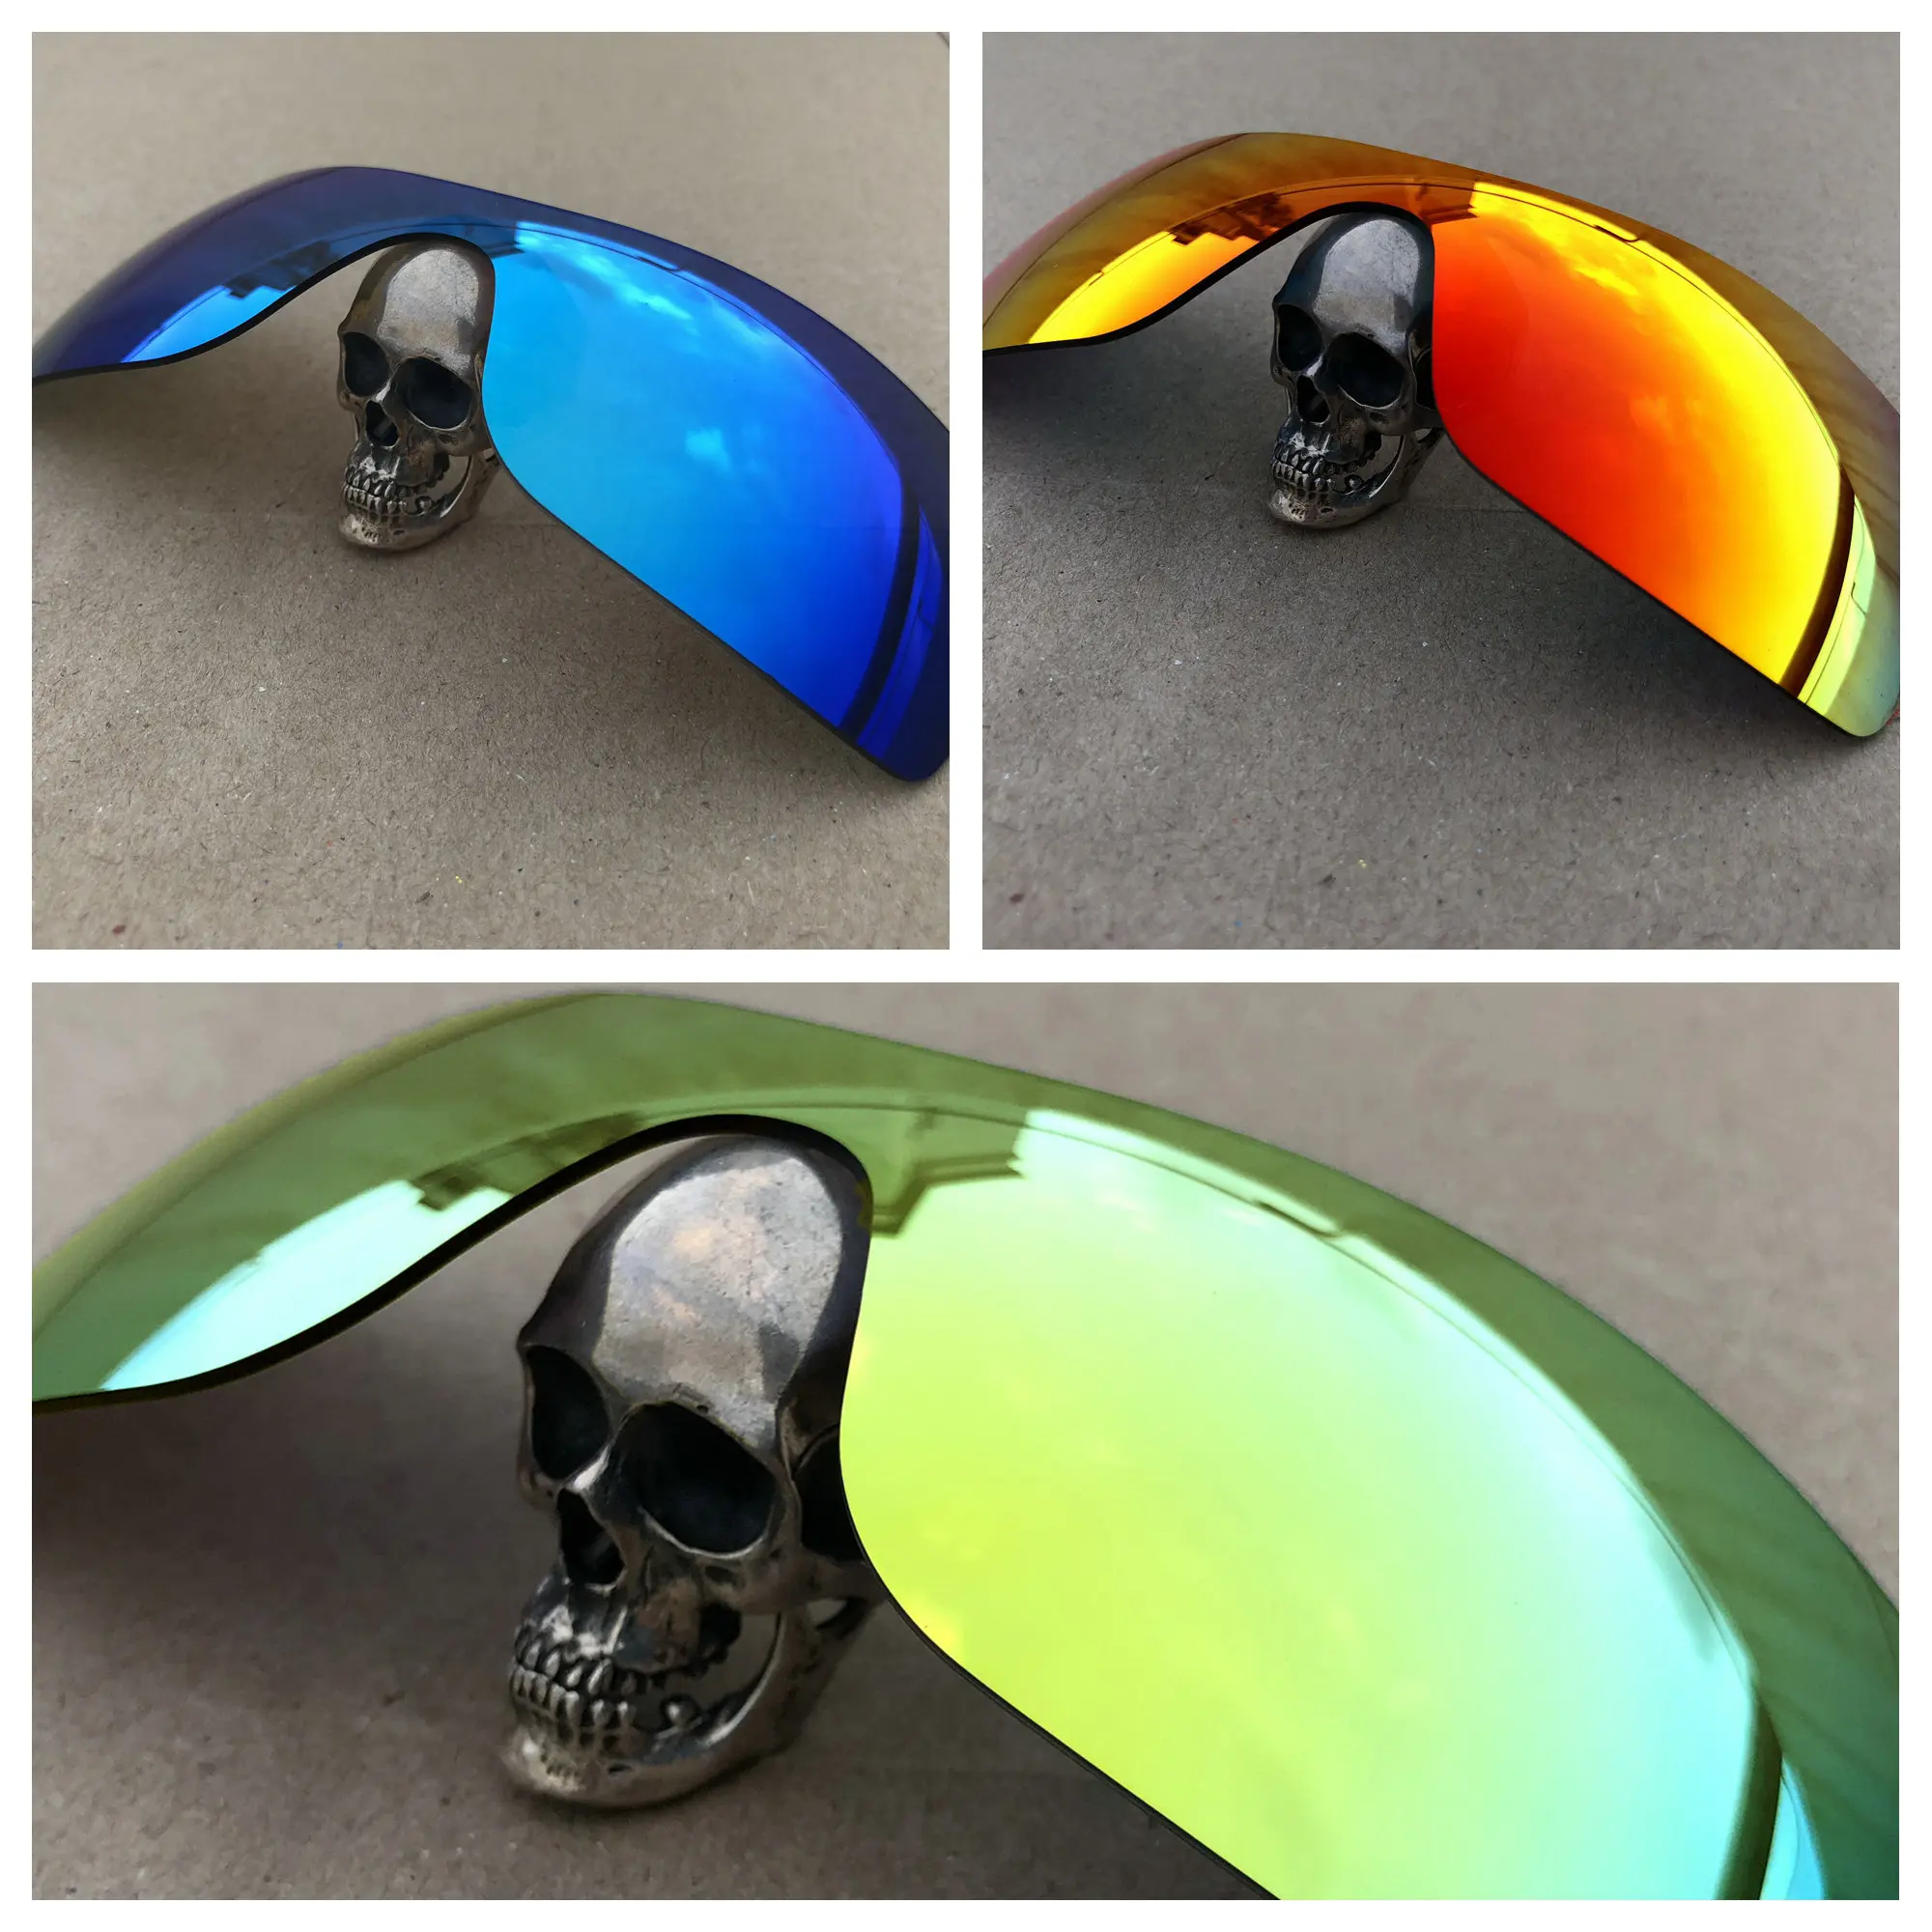 

Firtox True Polarized Enhanced Replacement Lenses for-Oakley Batwolf OO9101 Sunglass (Lens Only) - Blue+Red+Gold